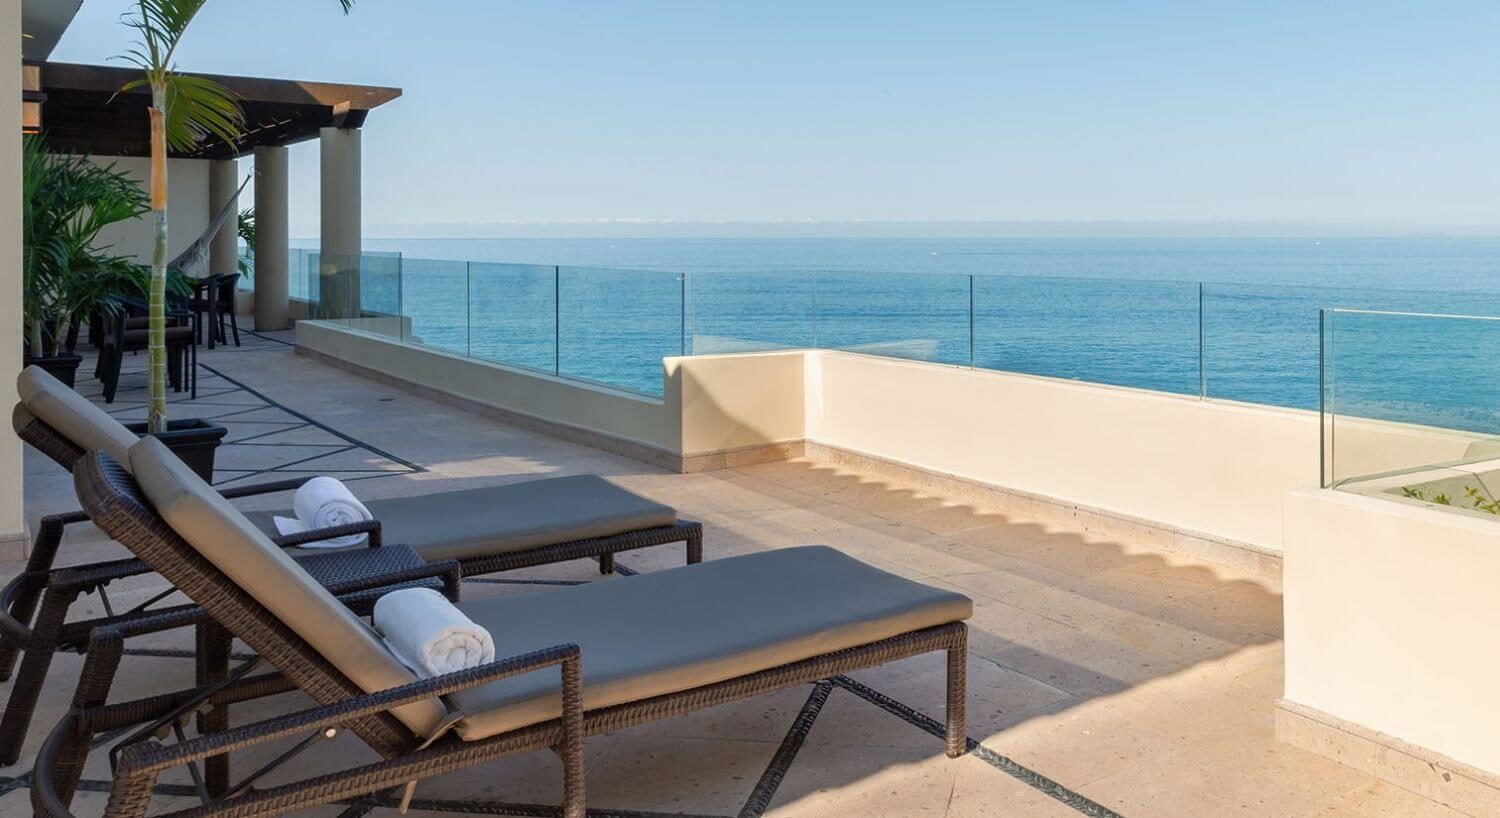 A private outdoor terrace with lounge chairs, palm trees, and stunning views of the ocean.